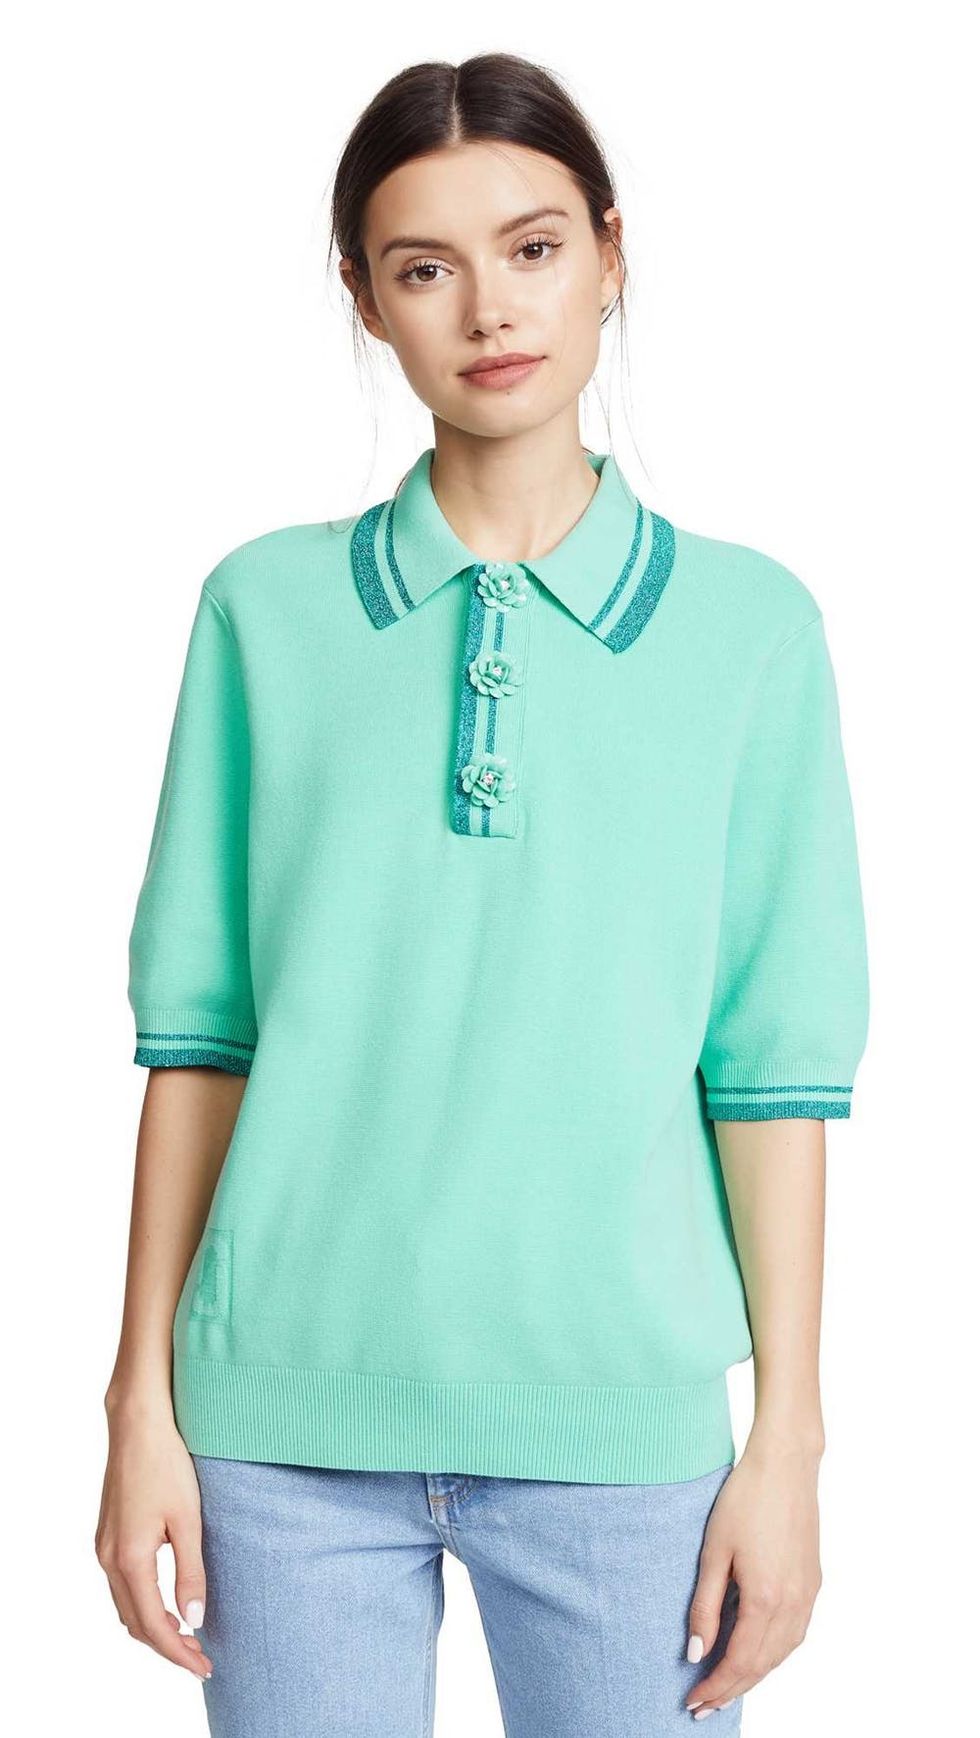 8 Trendy Polo Shirts That Are More Night Club Than Country Club - Brit + Co